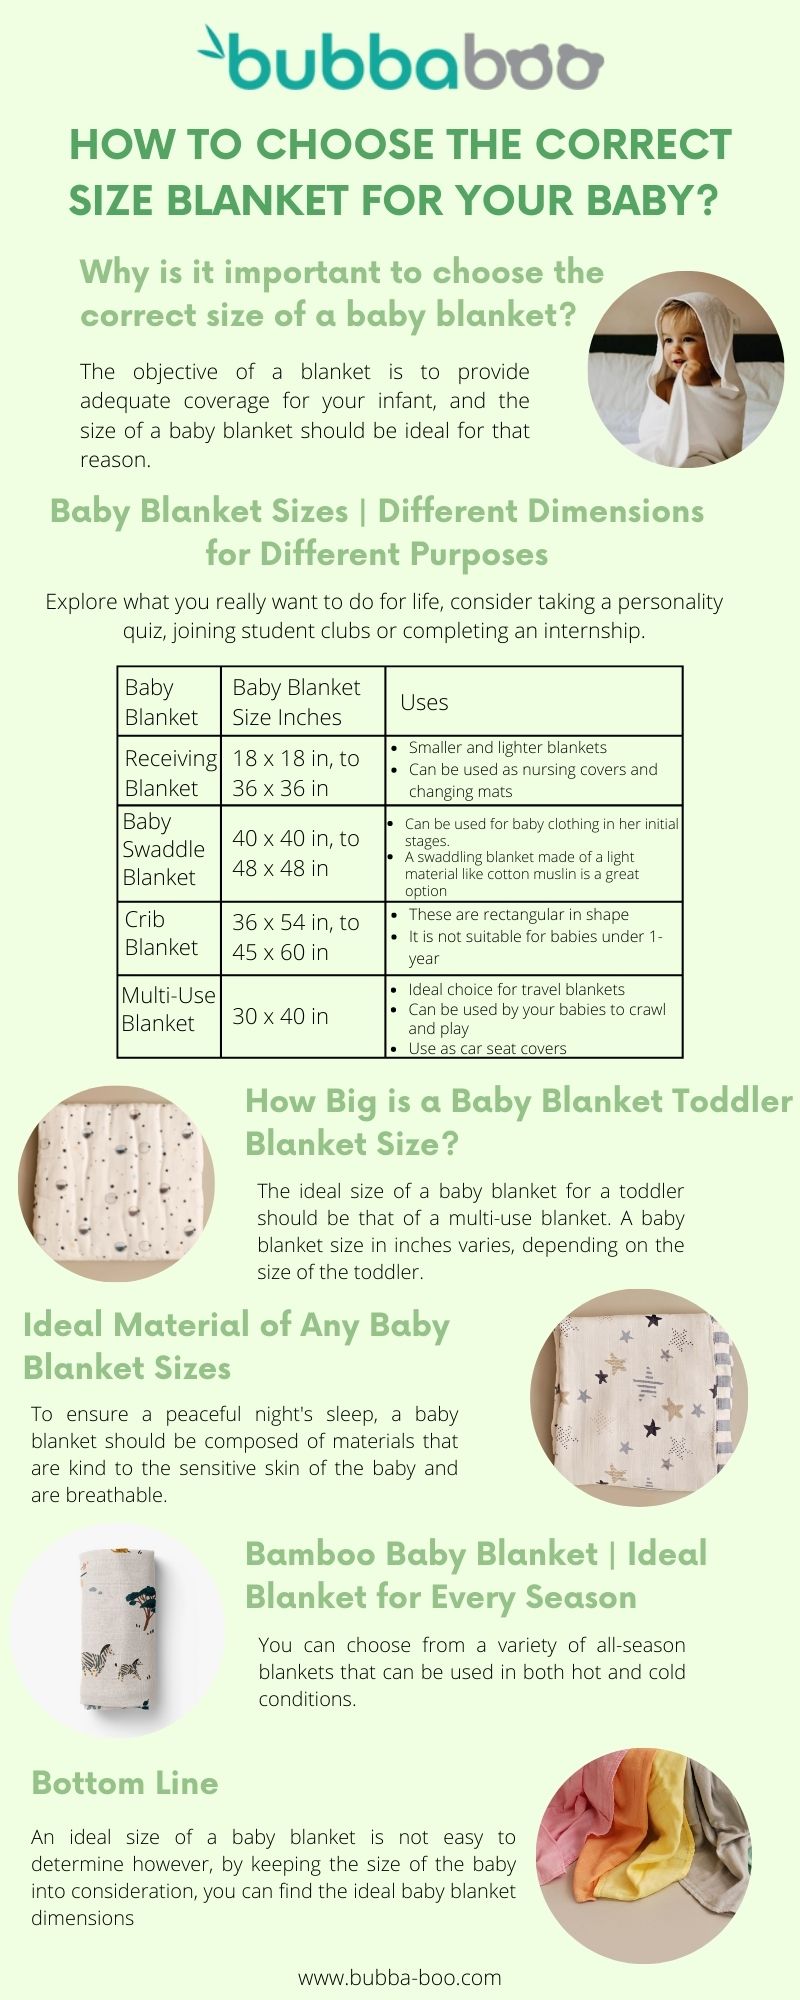 How to Choose the Correct Size Blanket for your Baby?